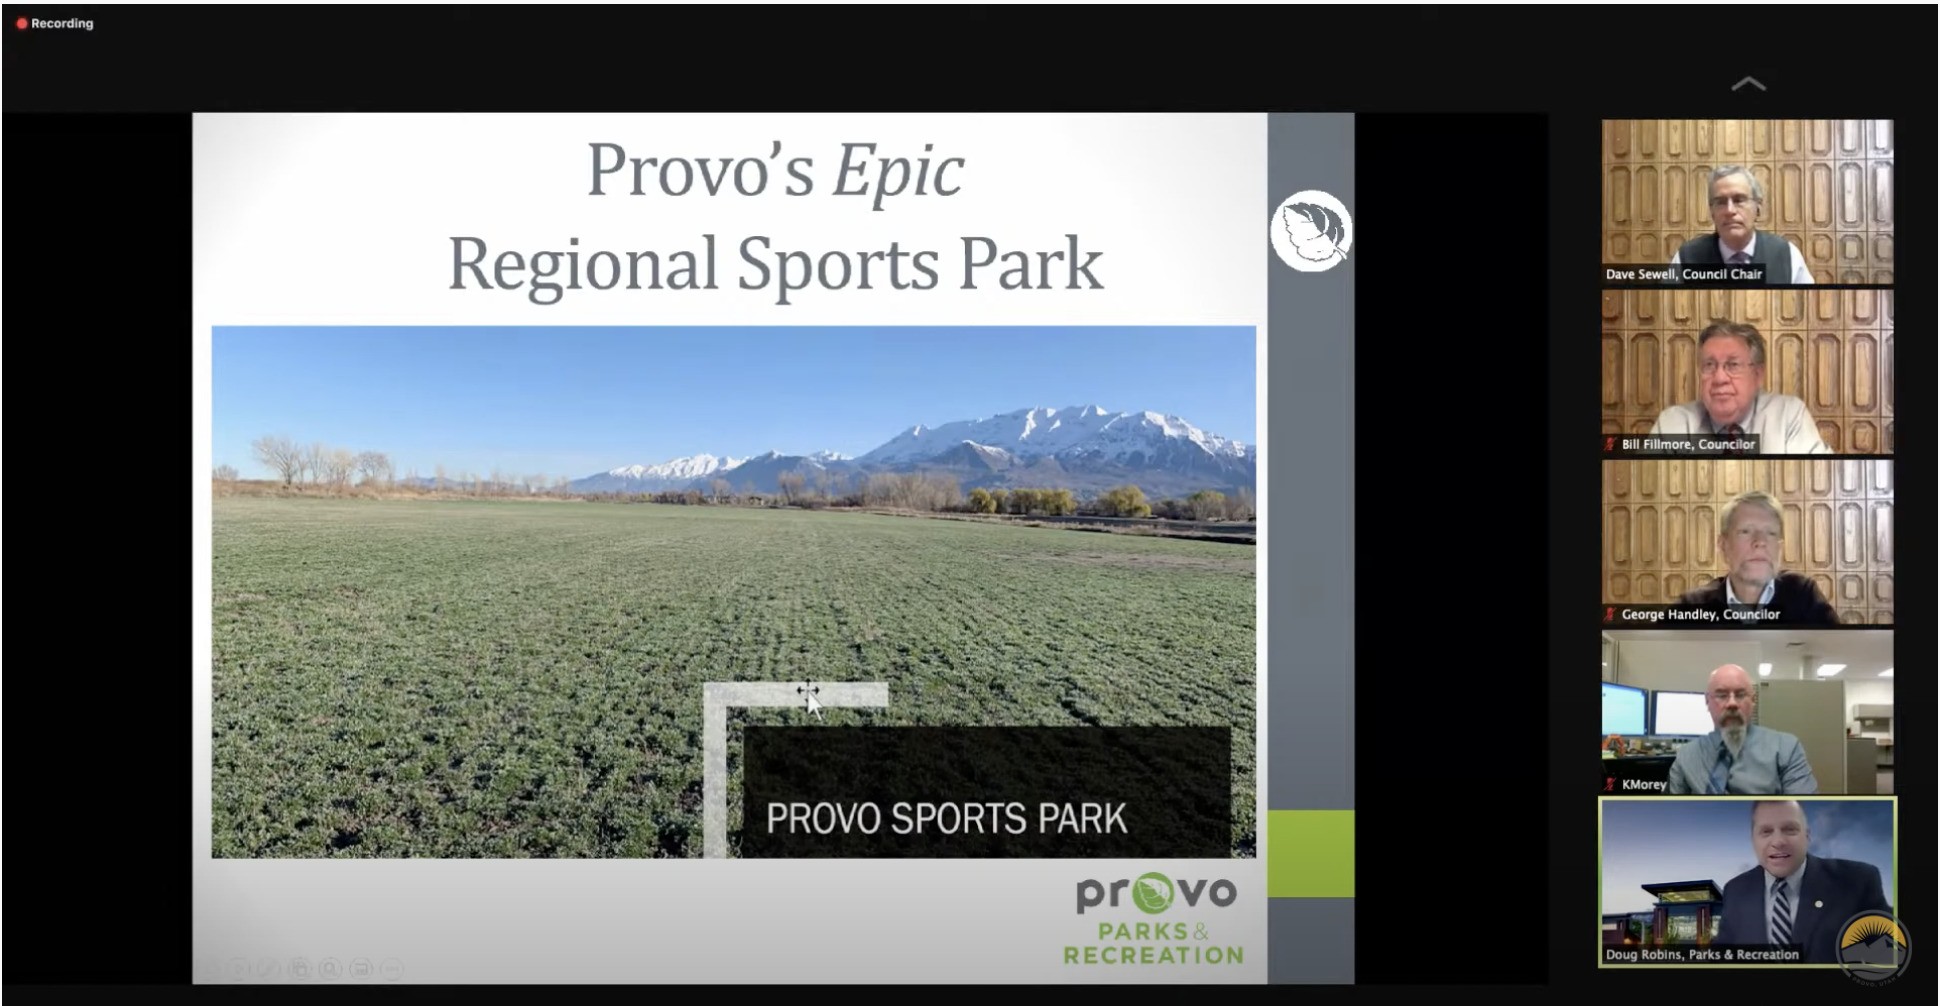 'Epic' regional sports park coming to Provo in 2024